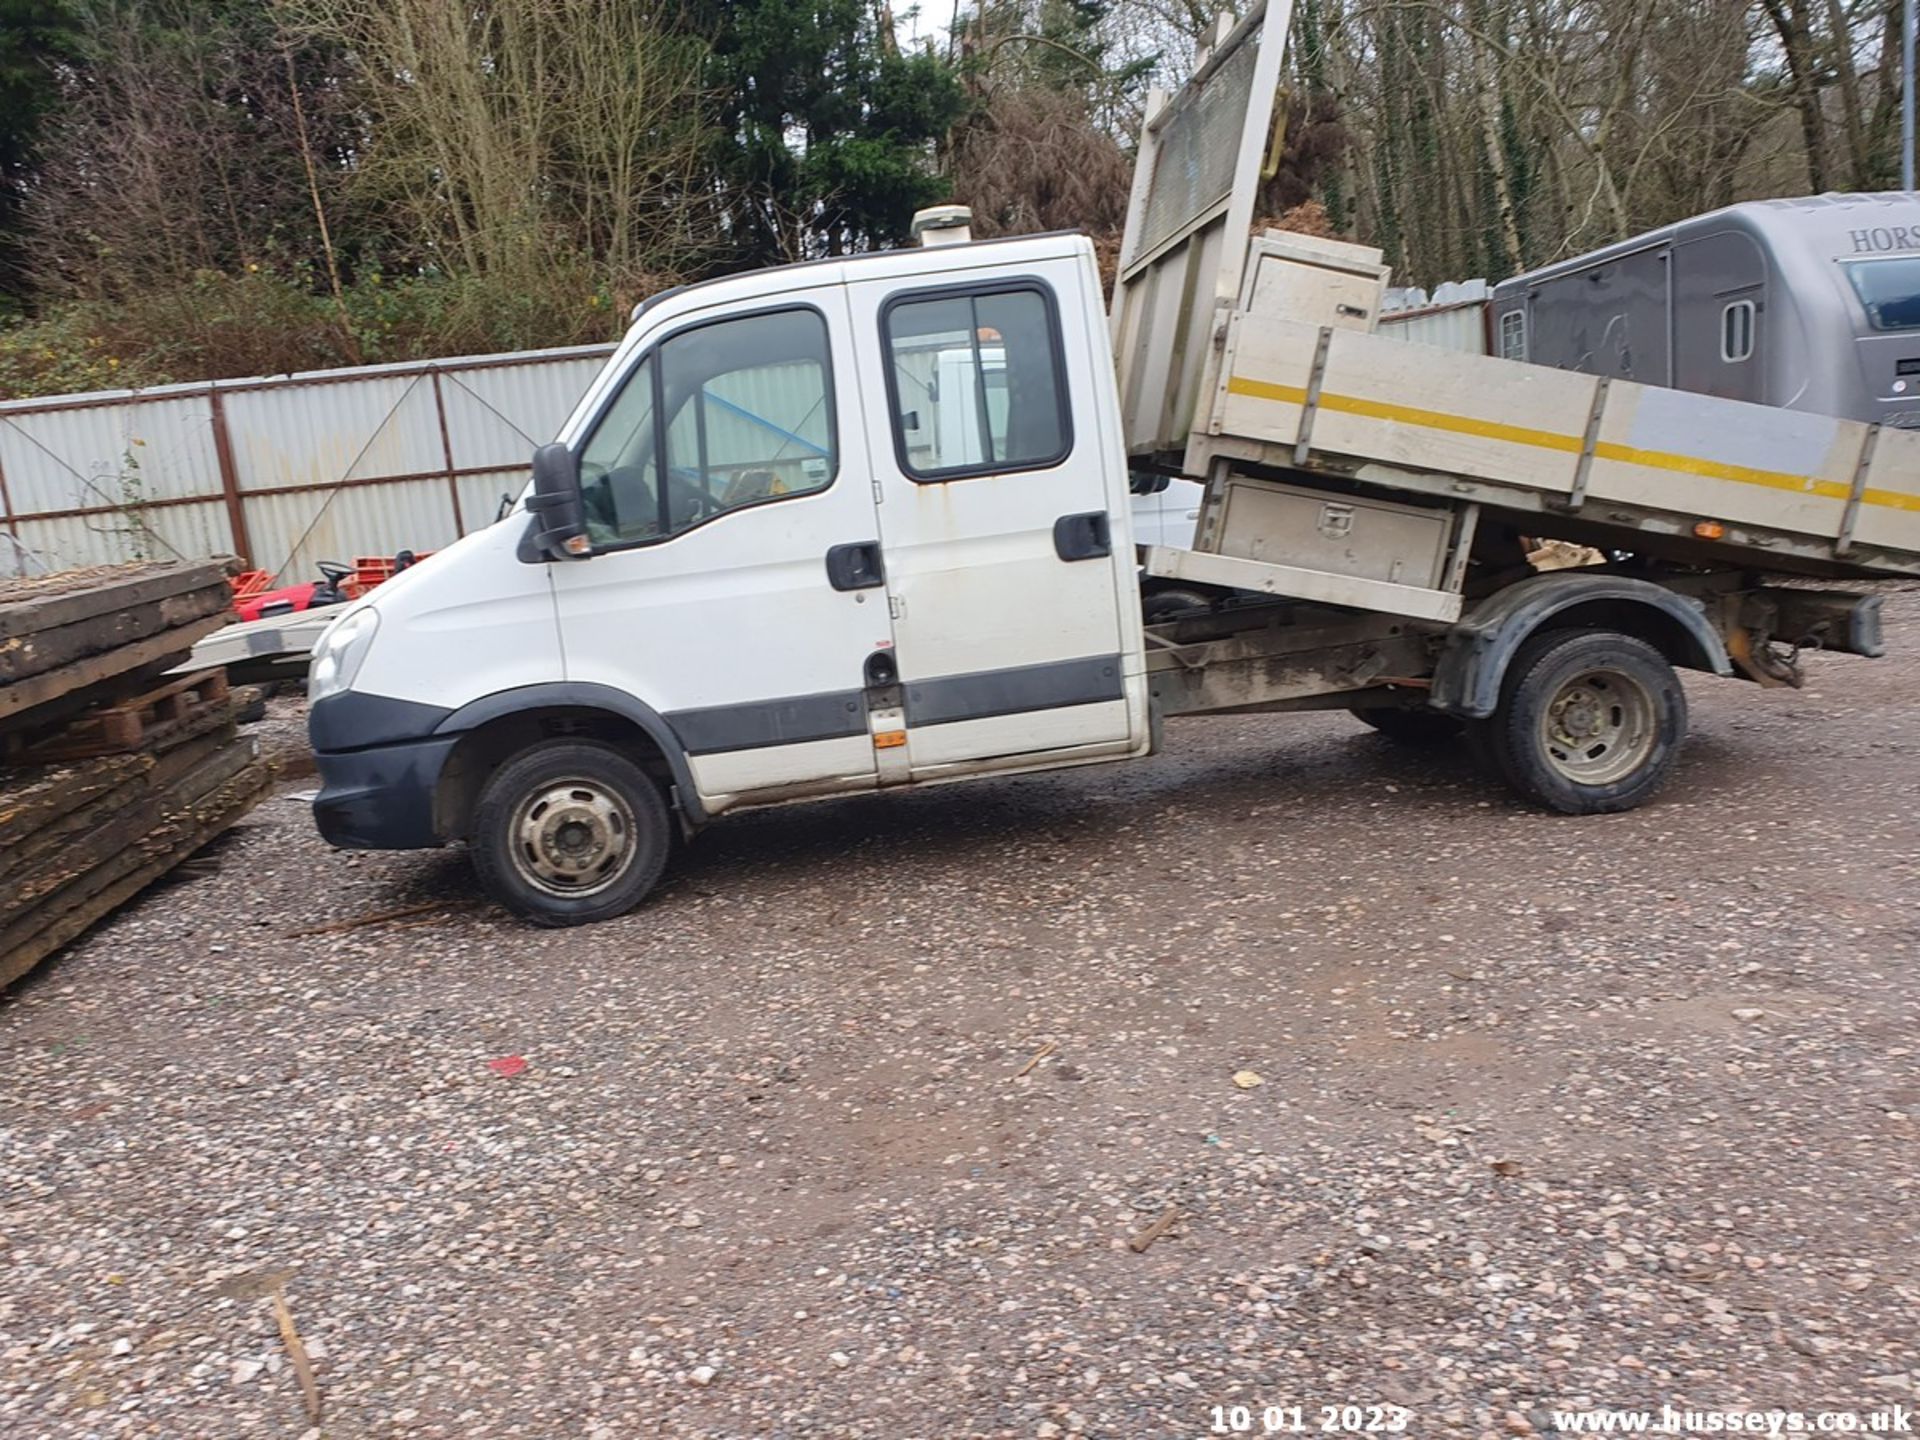 14/64 IVECO DAILY 50C15 - 2998cc 4dr Tipper (White, 108k) - Image 21 of 26